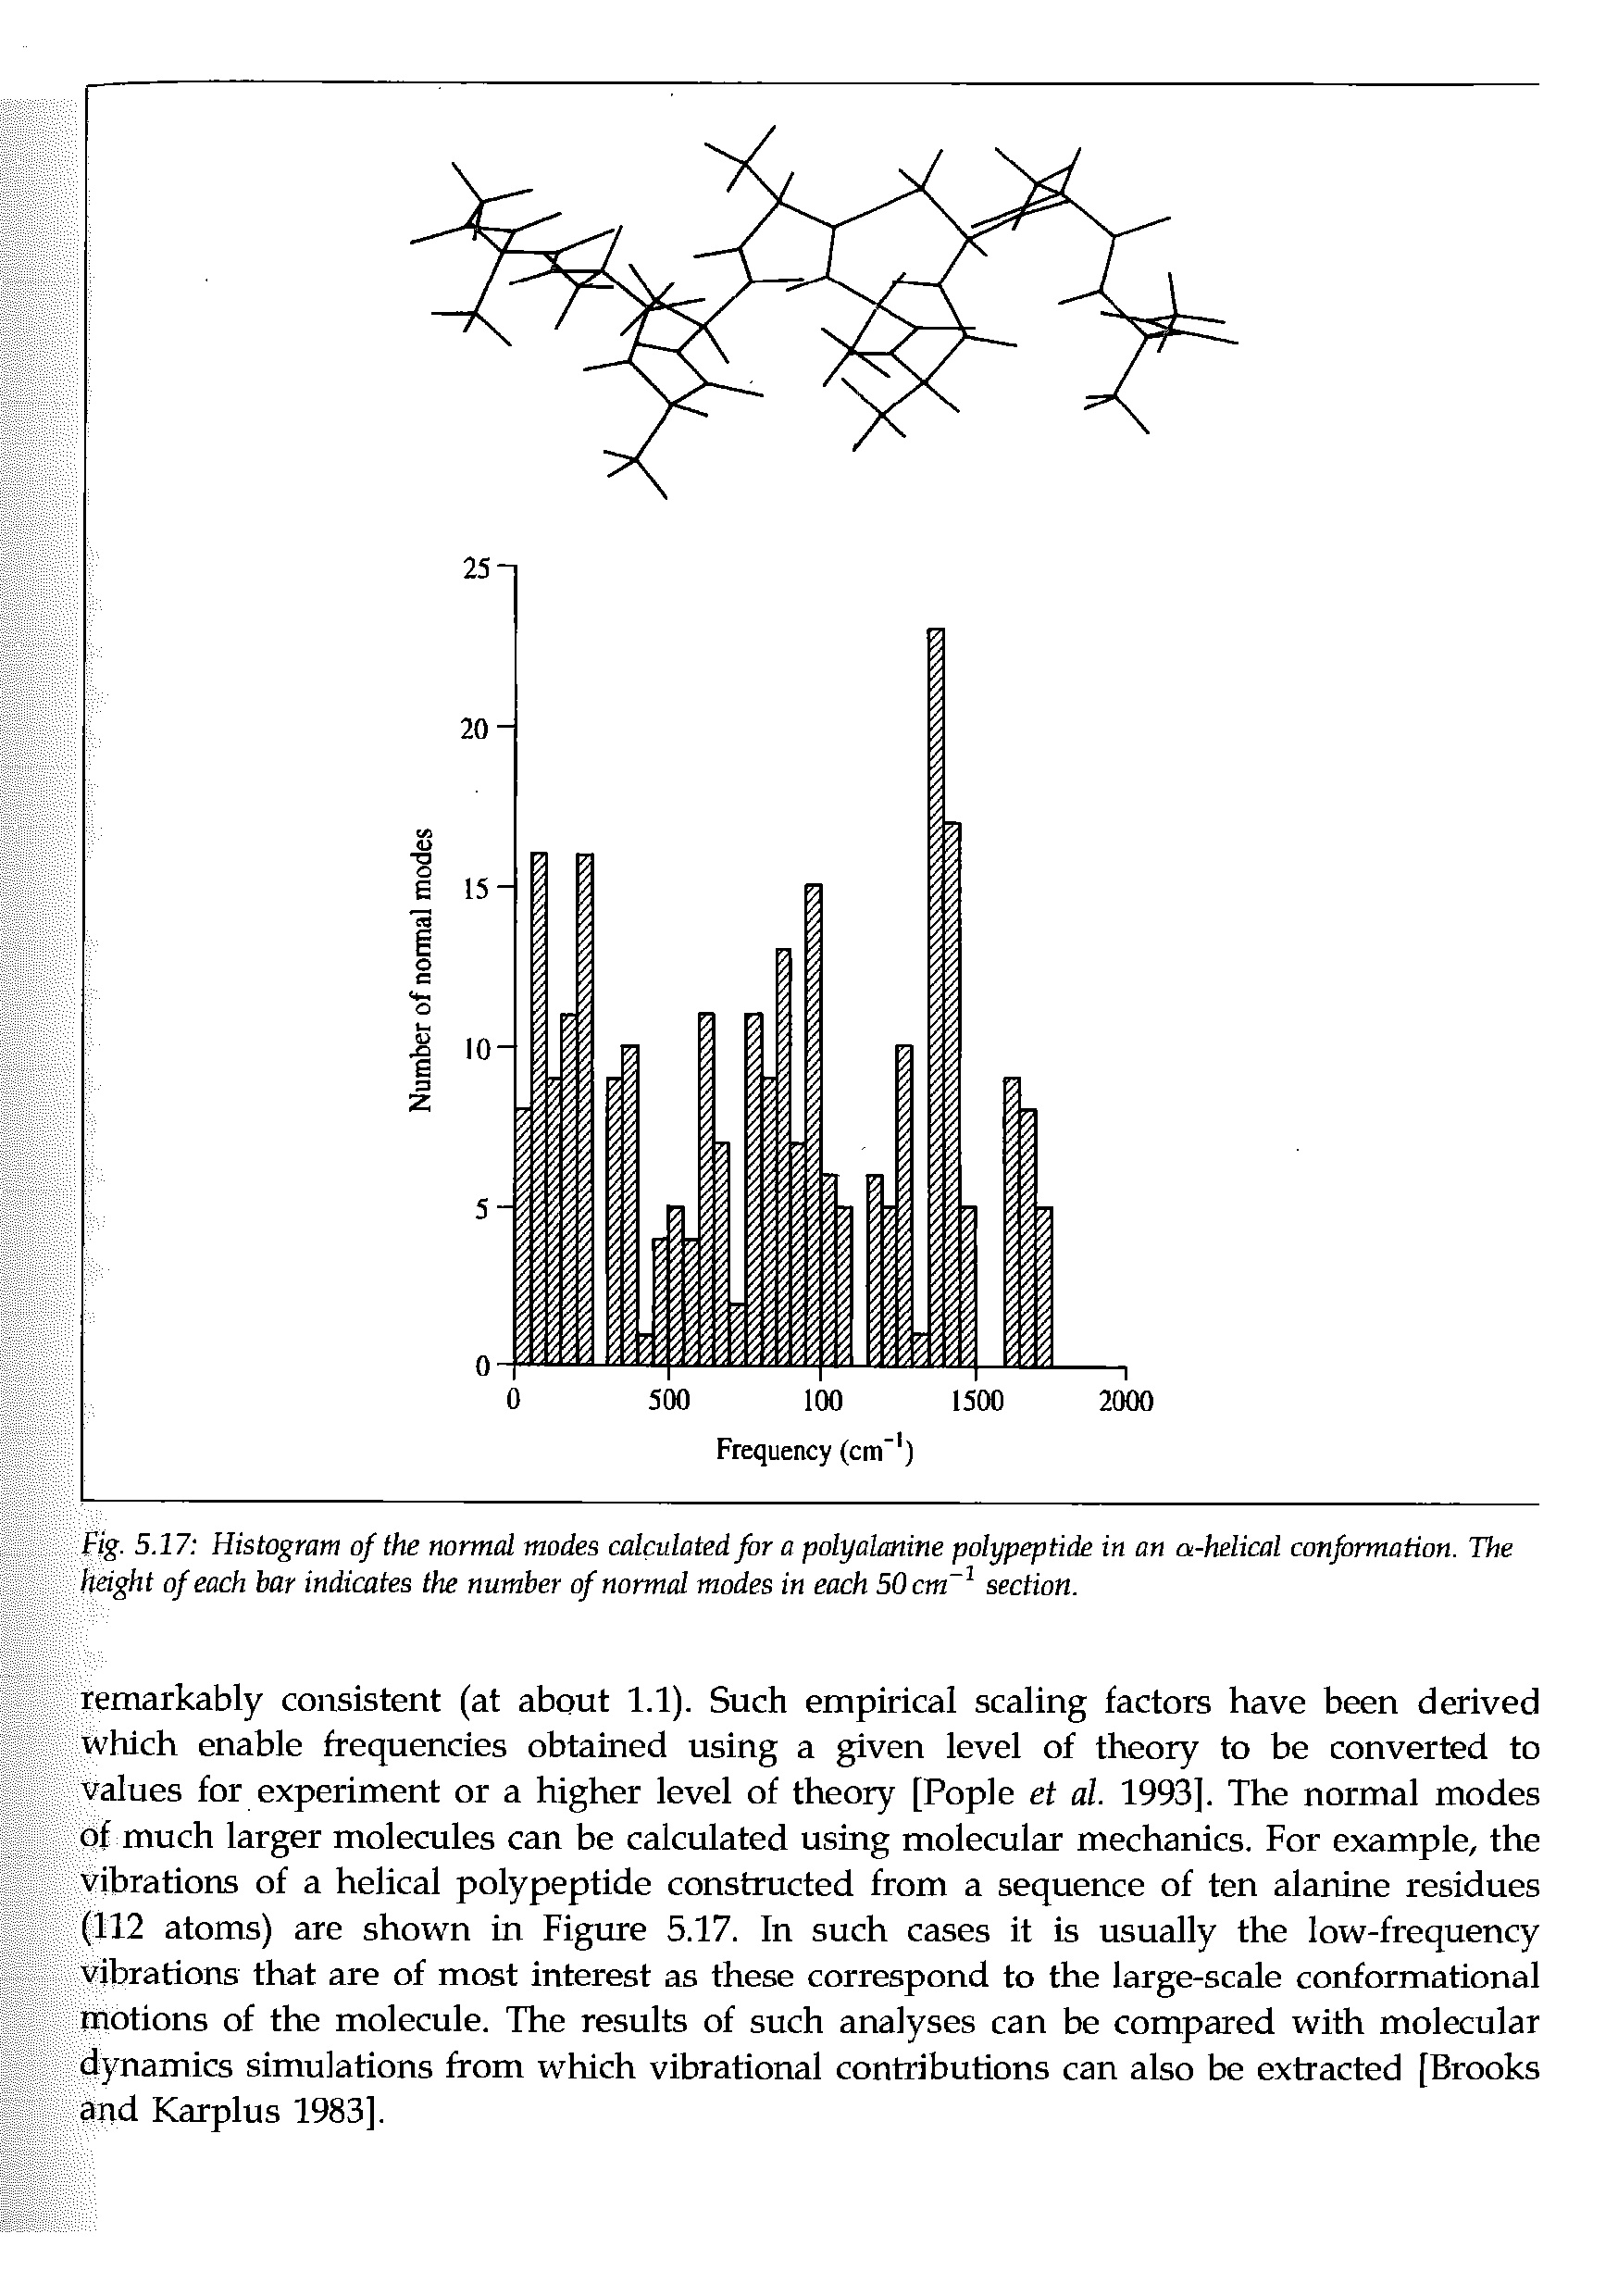 Fig. 5.17 Histogram of the normal modes calculated for a polyalanine polypeptide in an a-helical conformation. The height of each bar indicates the number of normal modes in each 50cm section.